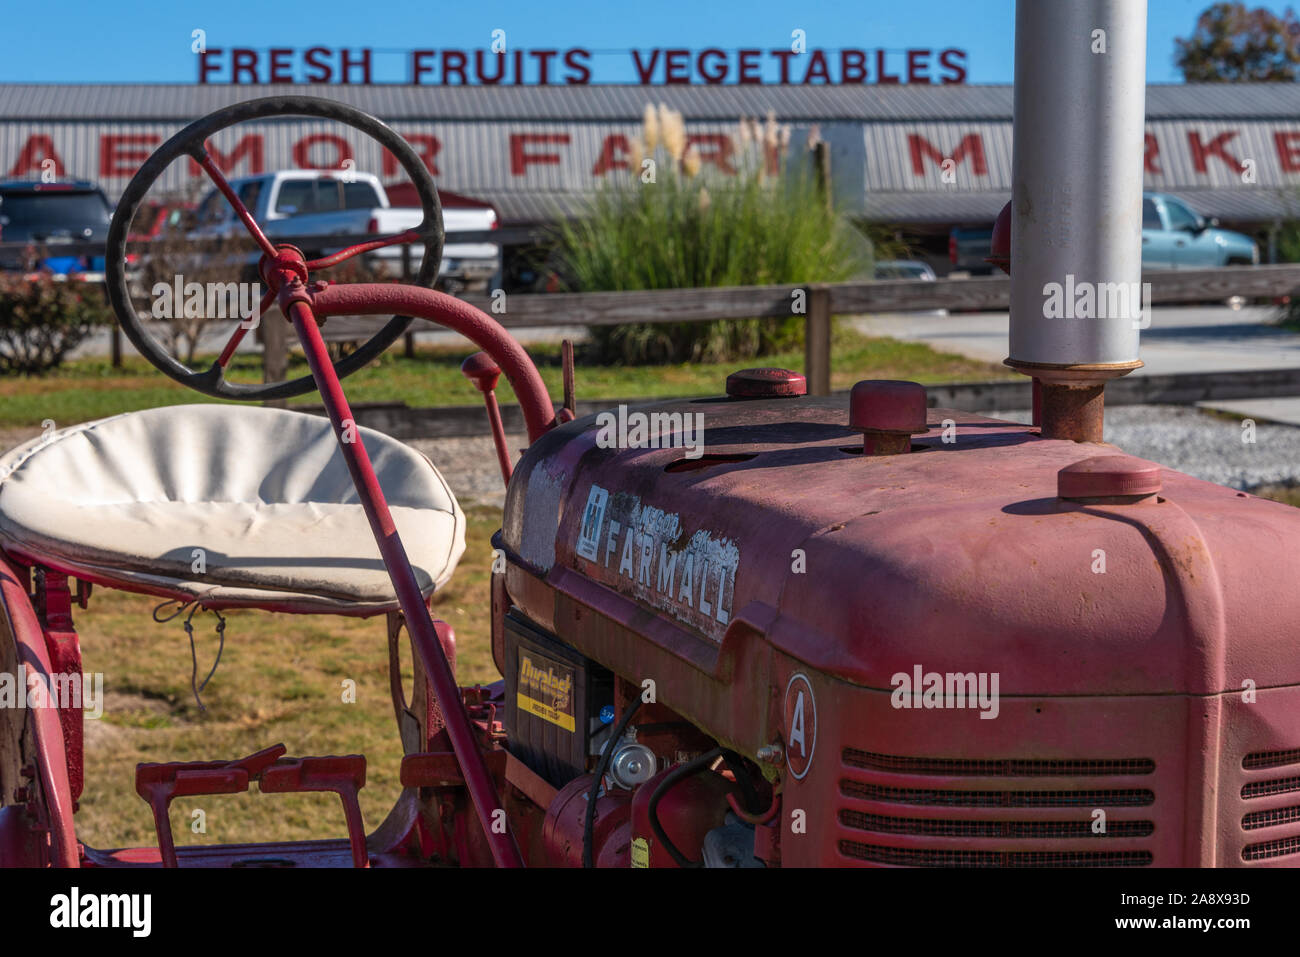 Jaemor Farms roadside market is a popular destination offering fresh fruit and vegetables to locals and travelers in Northeast Georgia. (USA) Stock Photo